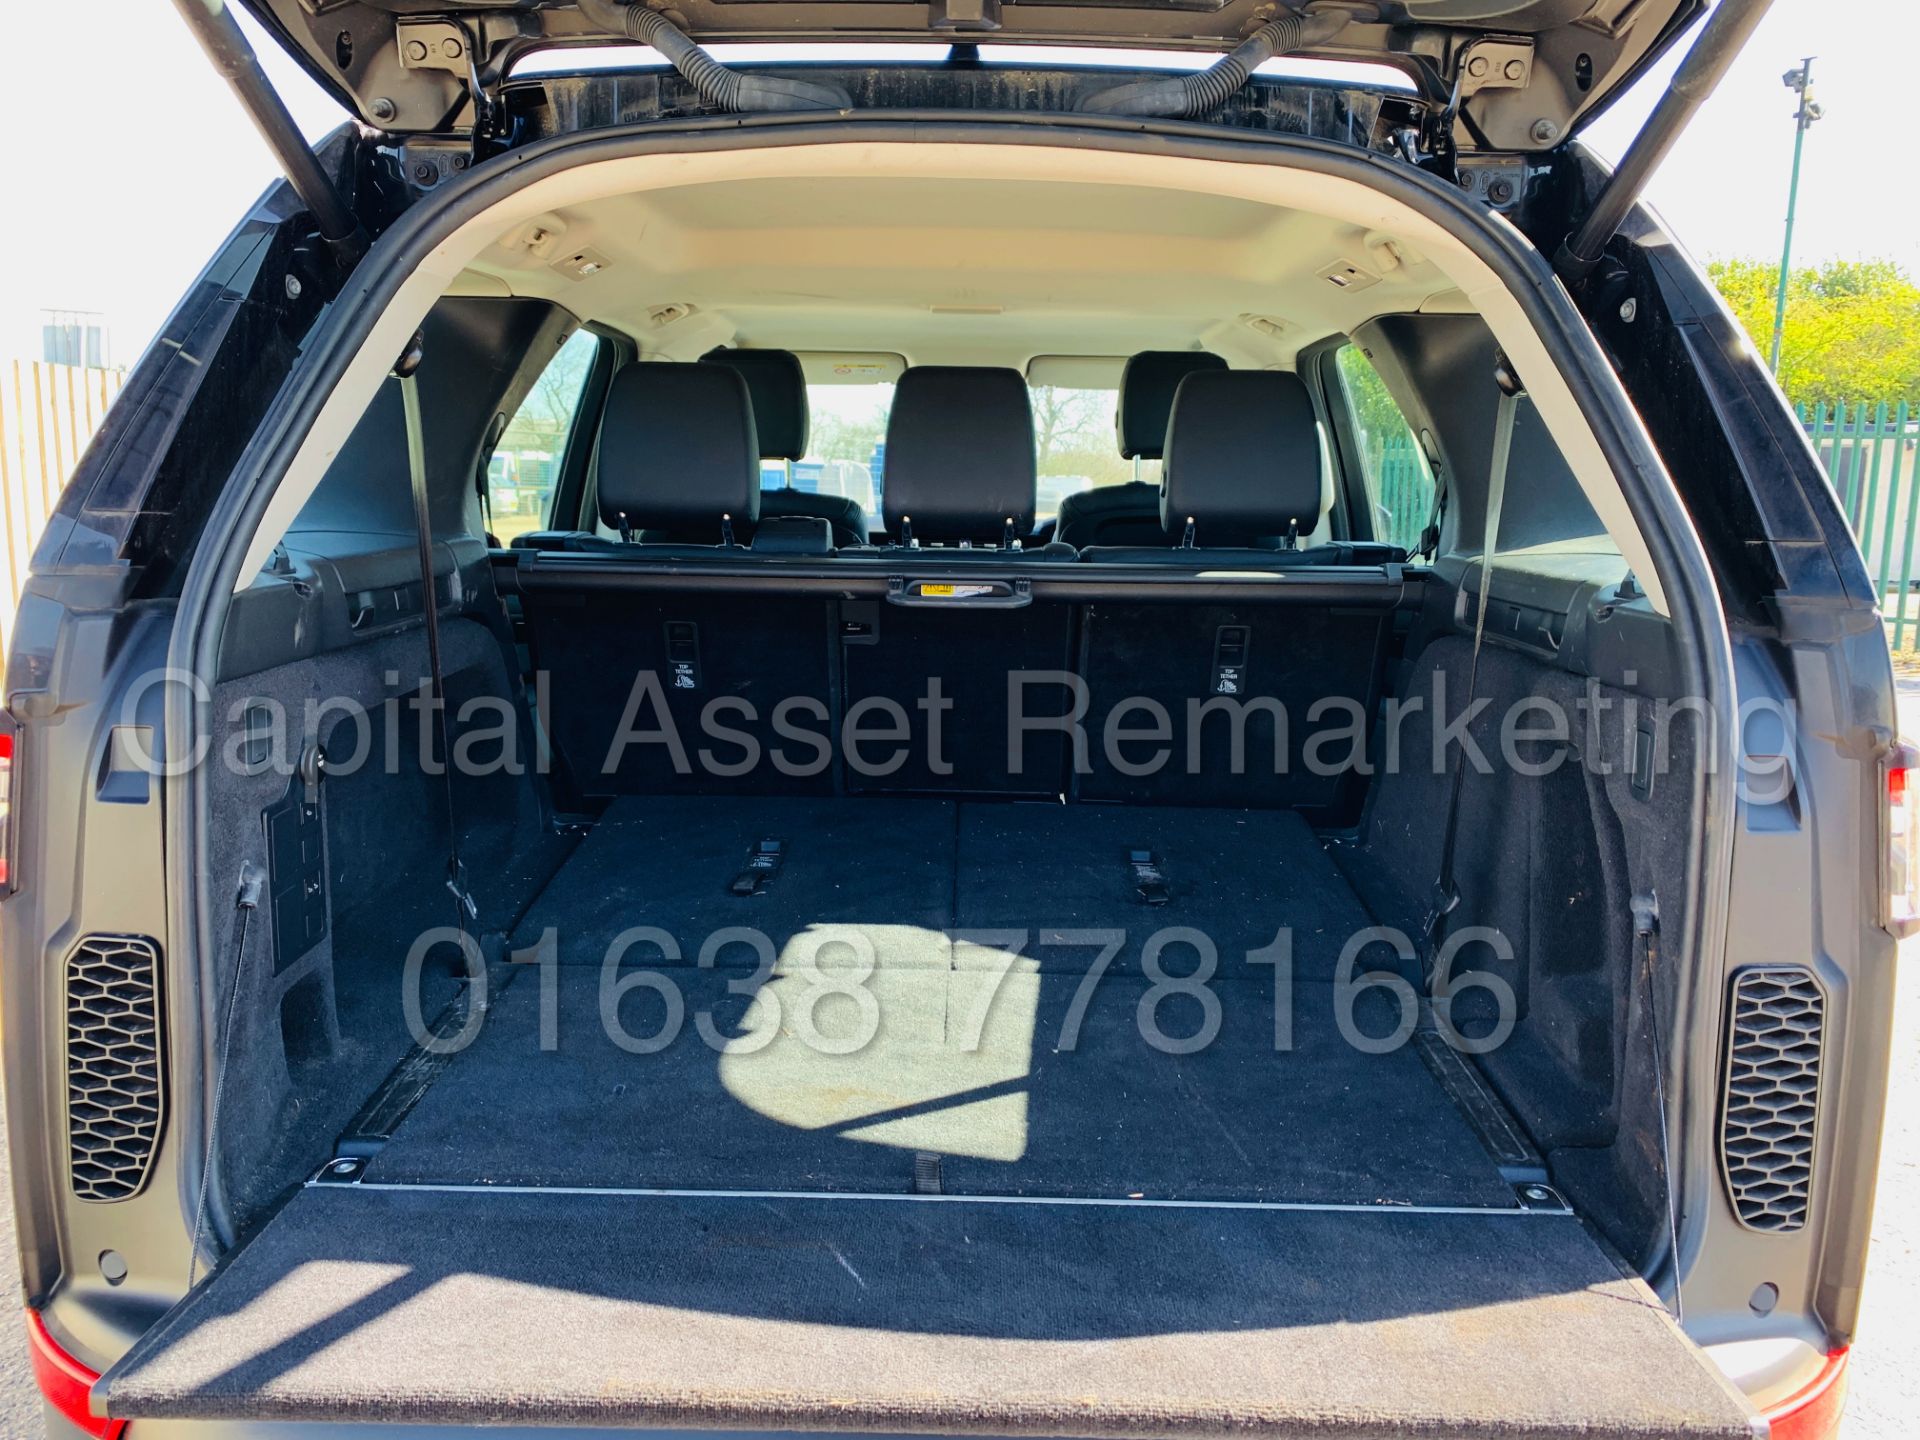 (On Sale) LAND ROVER DISCOVERY *7 SEATER SUV* (67 REG) 'AUTO-LEATHER-SAT NAV' *38,000 MILES* - Image 30 of 59